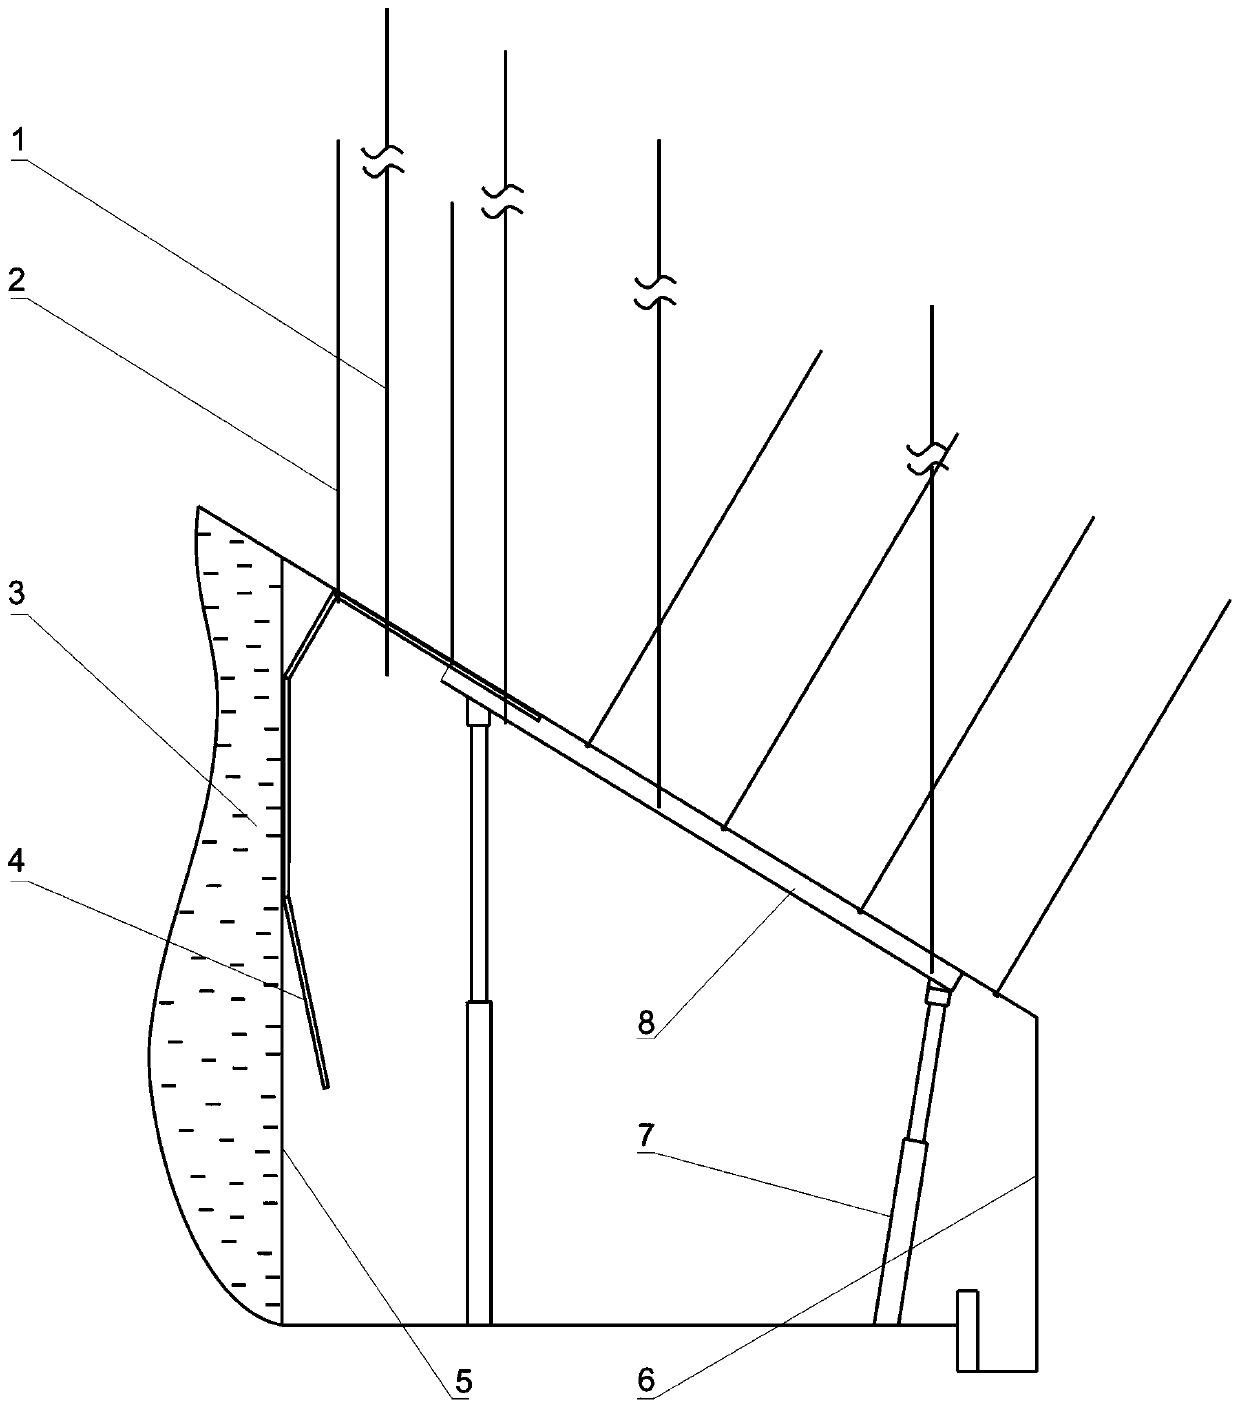 Combined gob-side entry retaining method of wedge-shaped regenerated wall and single-leg shed beam in coal mining roadway